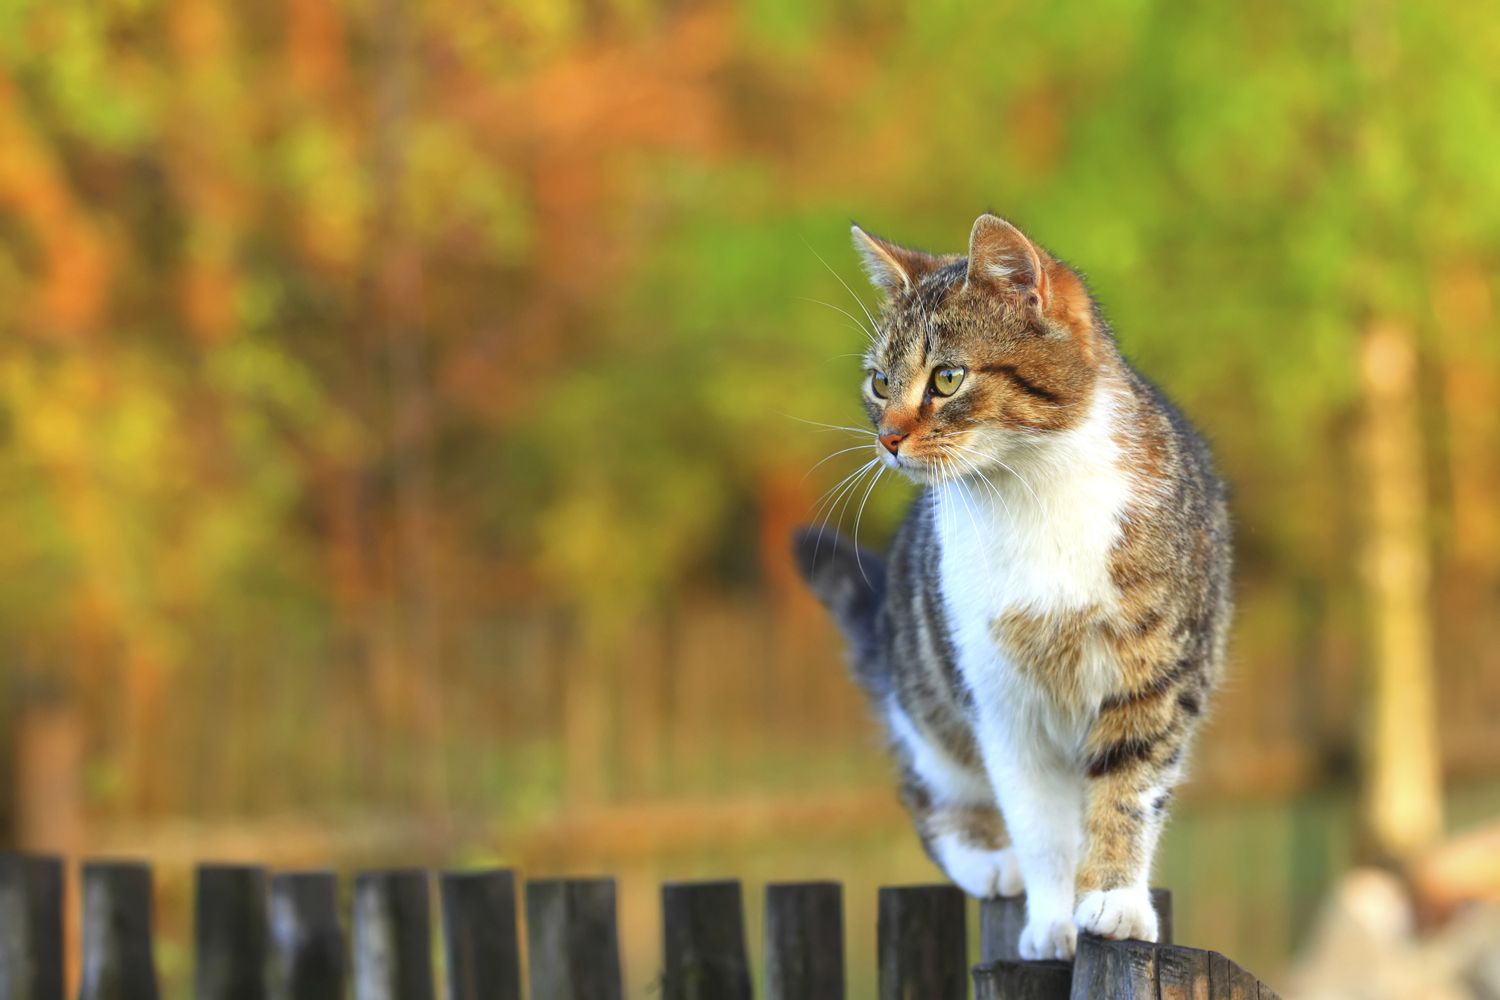 Cat standing on garden fence looking into the distance.